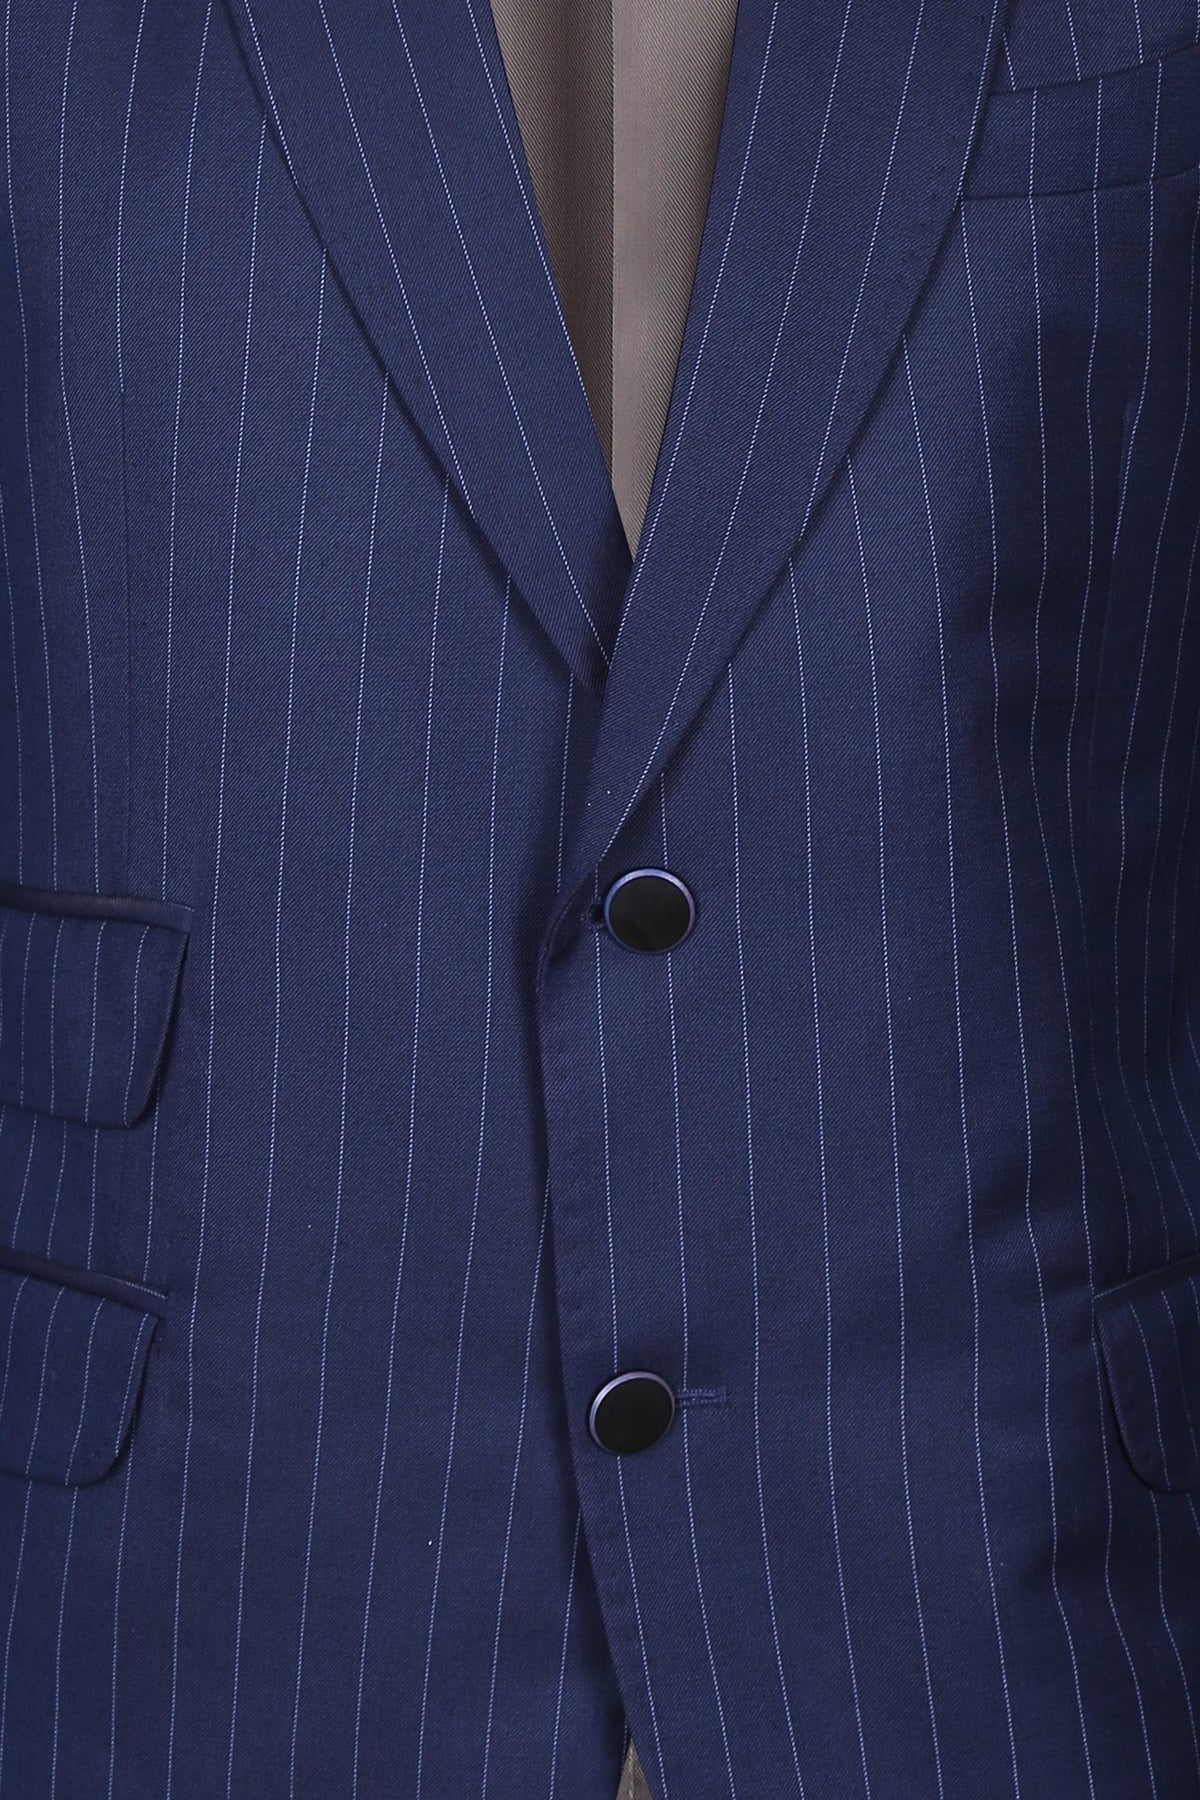 Navy blue pinstripe polyester wool single breasted suit